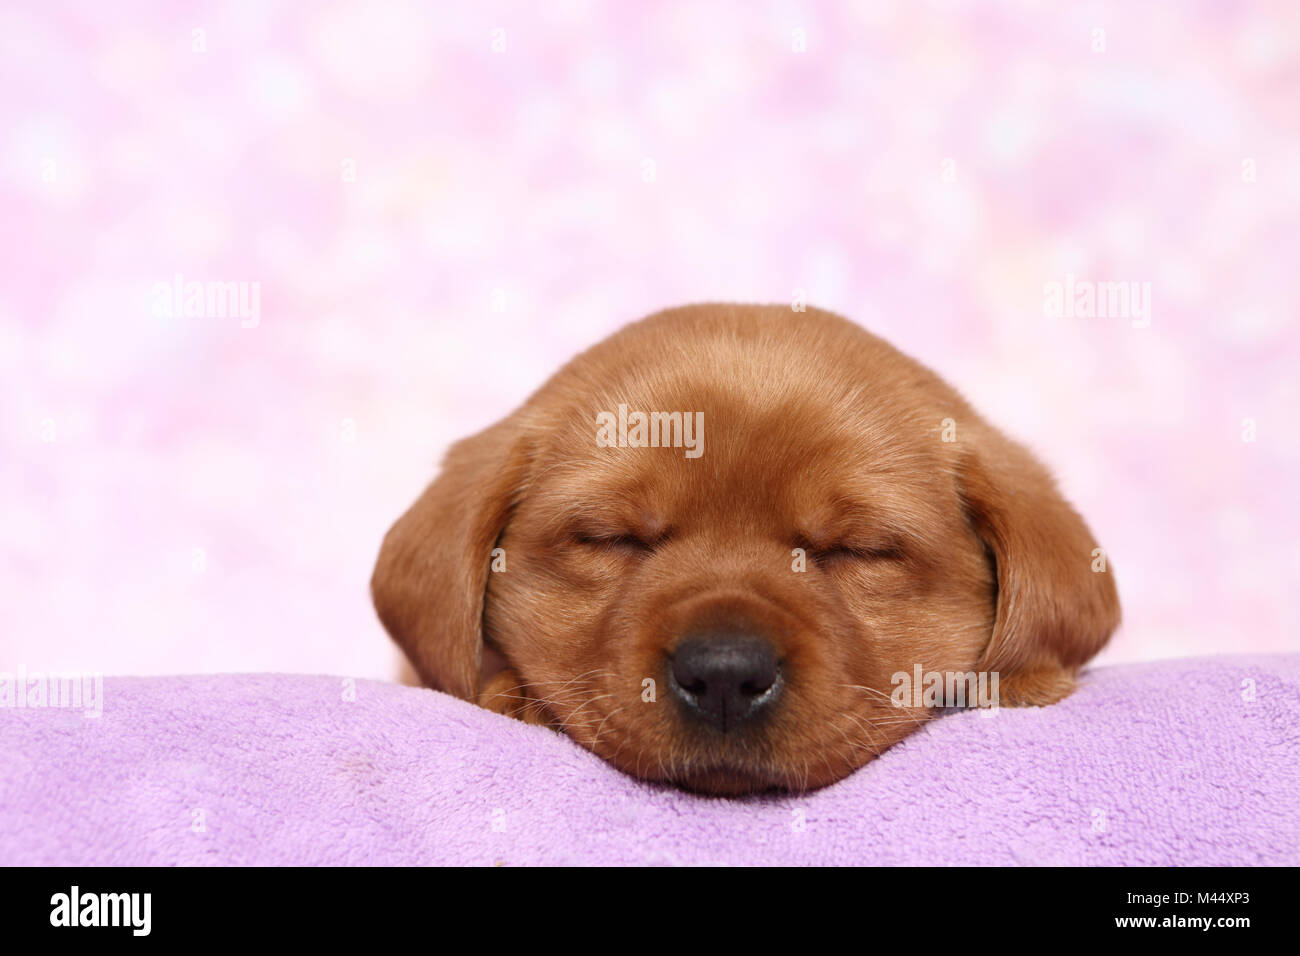 Labrador Retriever. Puppy (6 weeks old) sleeping on a blanket. Studio picture seen against a pink background. Germany Stock Photo